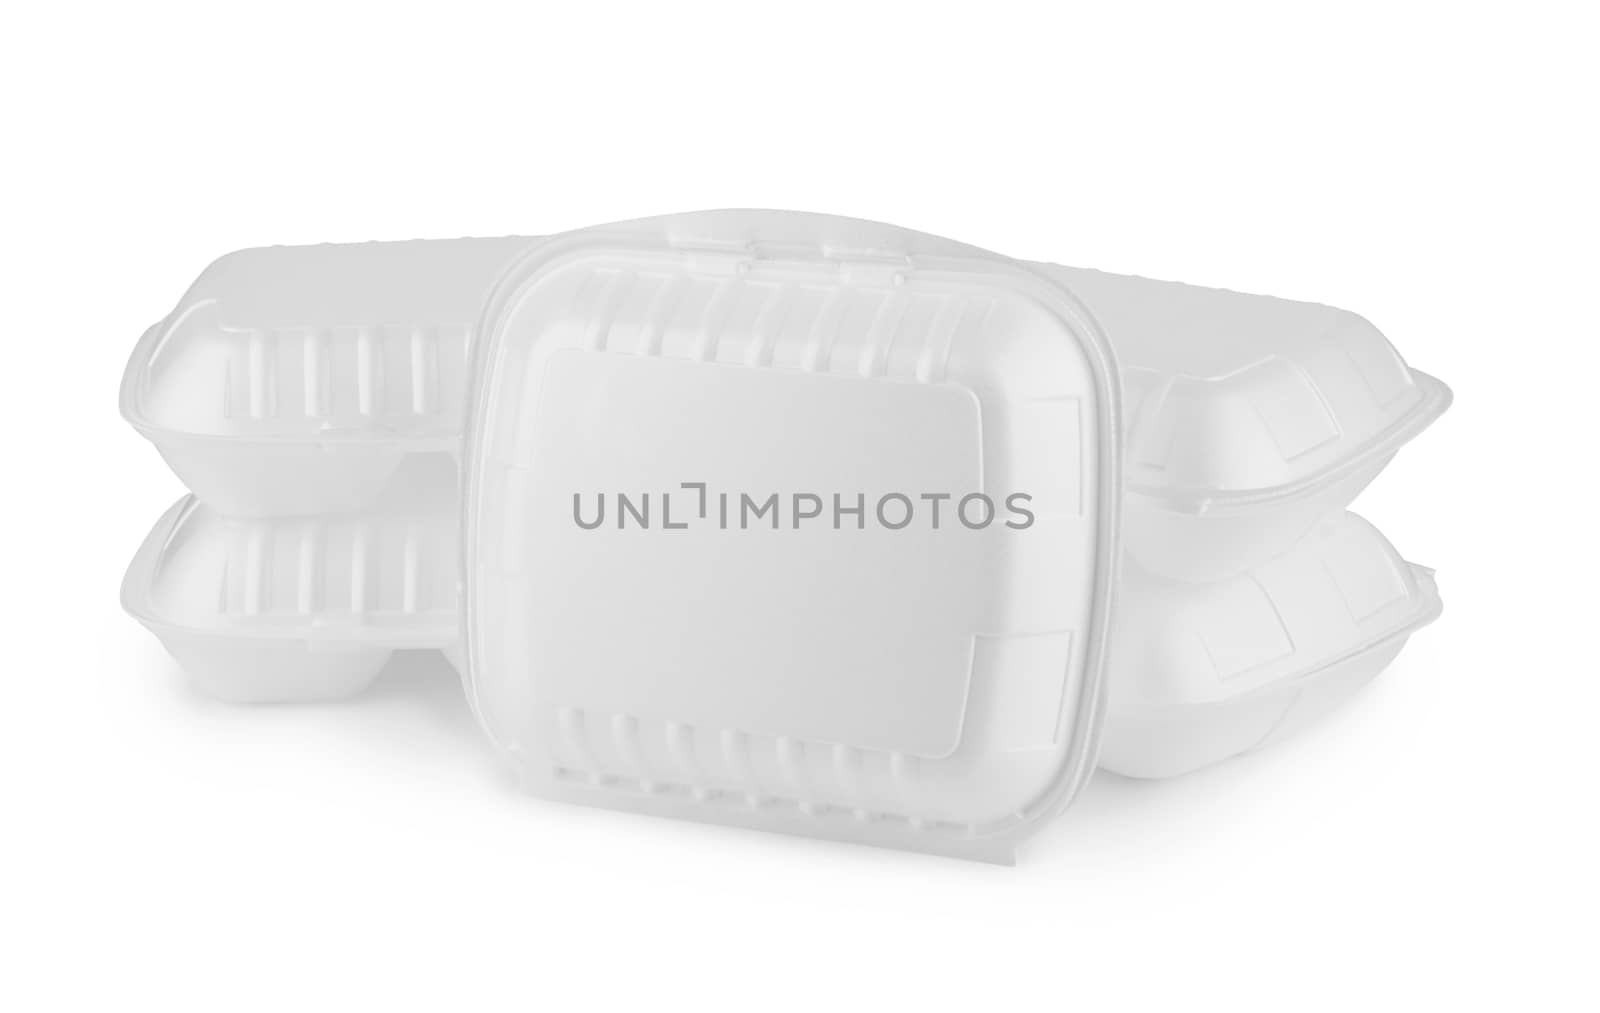 Thermo box for food isolated on white background